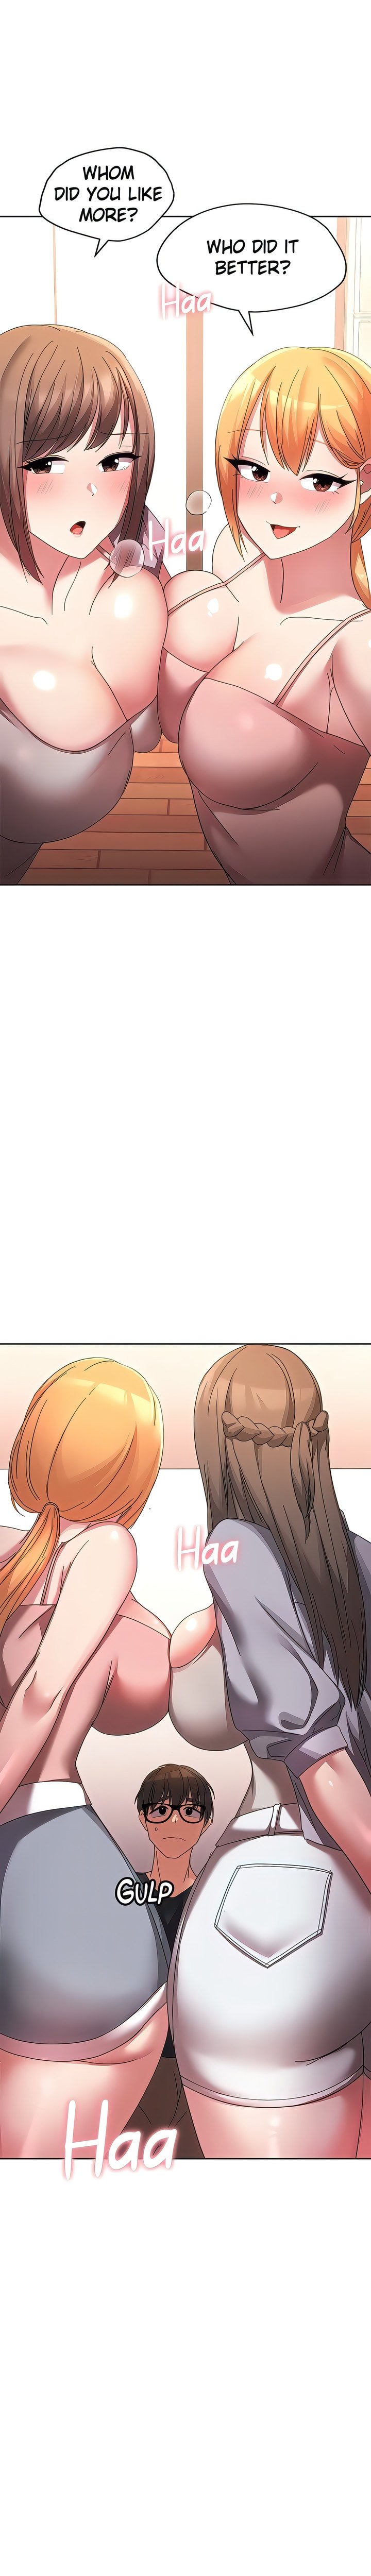 girls-i-used-to-teach-chap-32-0